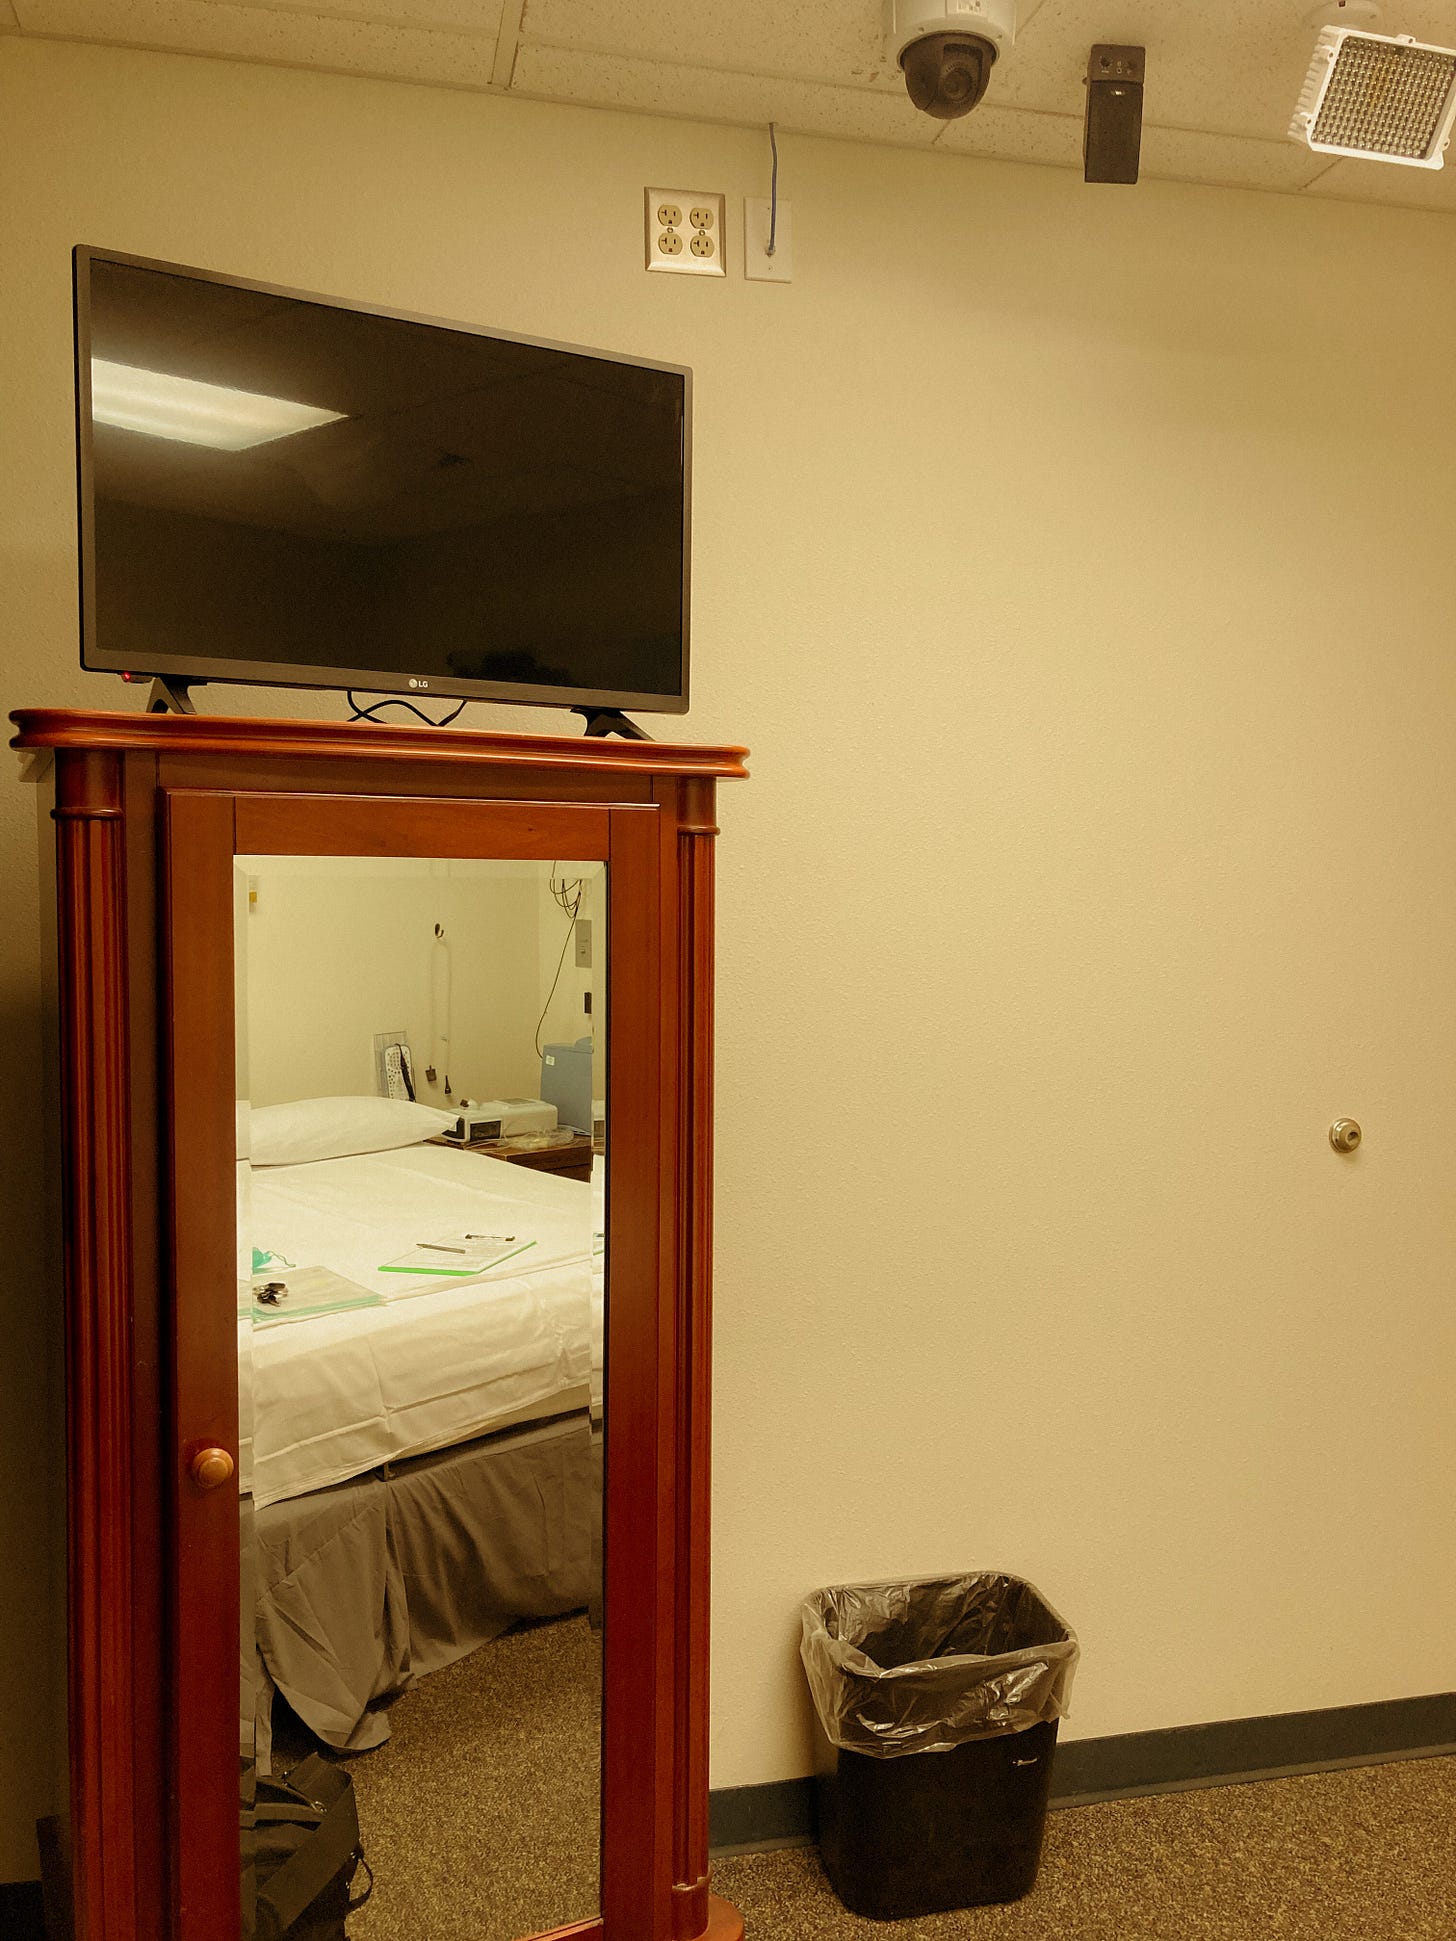 A white room with institutional ceiling tiles, with a mirror on an armoire reflecting a bed with white sheets and machines next to it.